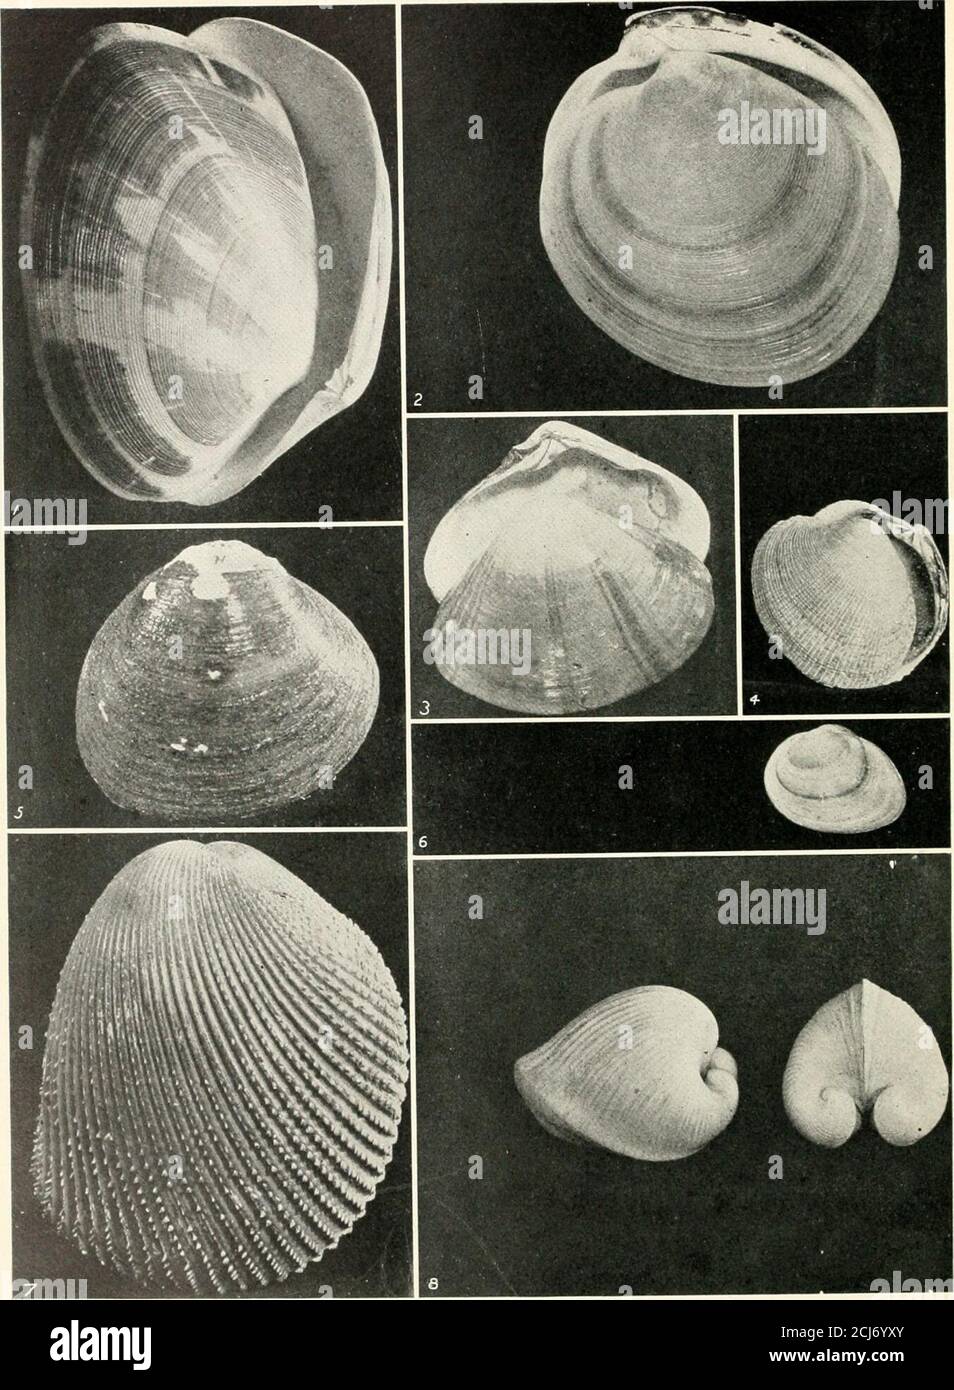 . The shell book . CLAMS, USEFUL AND BEAUTIFUL 1 An experienced clam digger wielding the rake. 3 Camp Venus Clam, Circe castrensis, showing variations. 2 Mud dug away to show hard-shell clams in place. Note 4 Forking Venus Clam, Circf diiaricata. tube where Ihe siphon is thrust up to the surface. 5 Elegant Venus Clam, Dione Veneris. 6 Frilled Venus Clam, Chione Gnidia.. 1 Tapes literals. 2 Dostnia discus. CLAMS AND COCKLES Tivclacrassatdloides (much reduced). 5 Cyrena Curalinmsis. Tapes staminea. sulctitnm. 7 Cardivni quadngenenum. 8 Isocardid cor. The Surf Clams. Hen Clams narrower anterior e Stock Photo